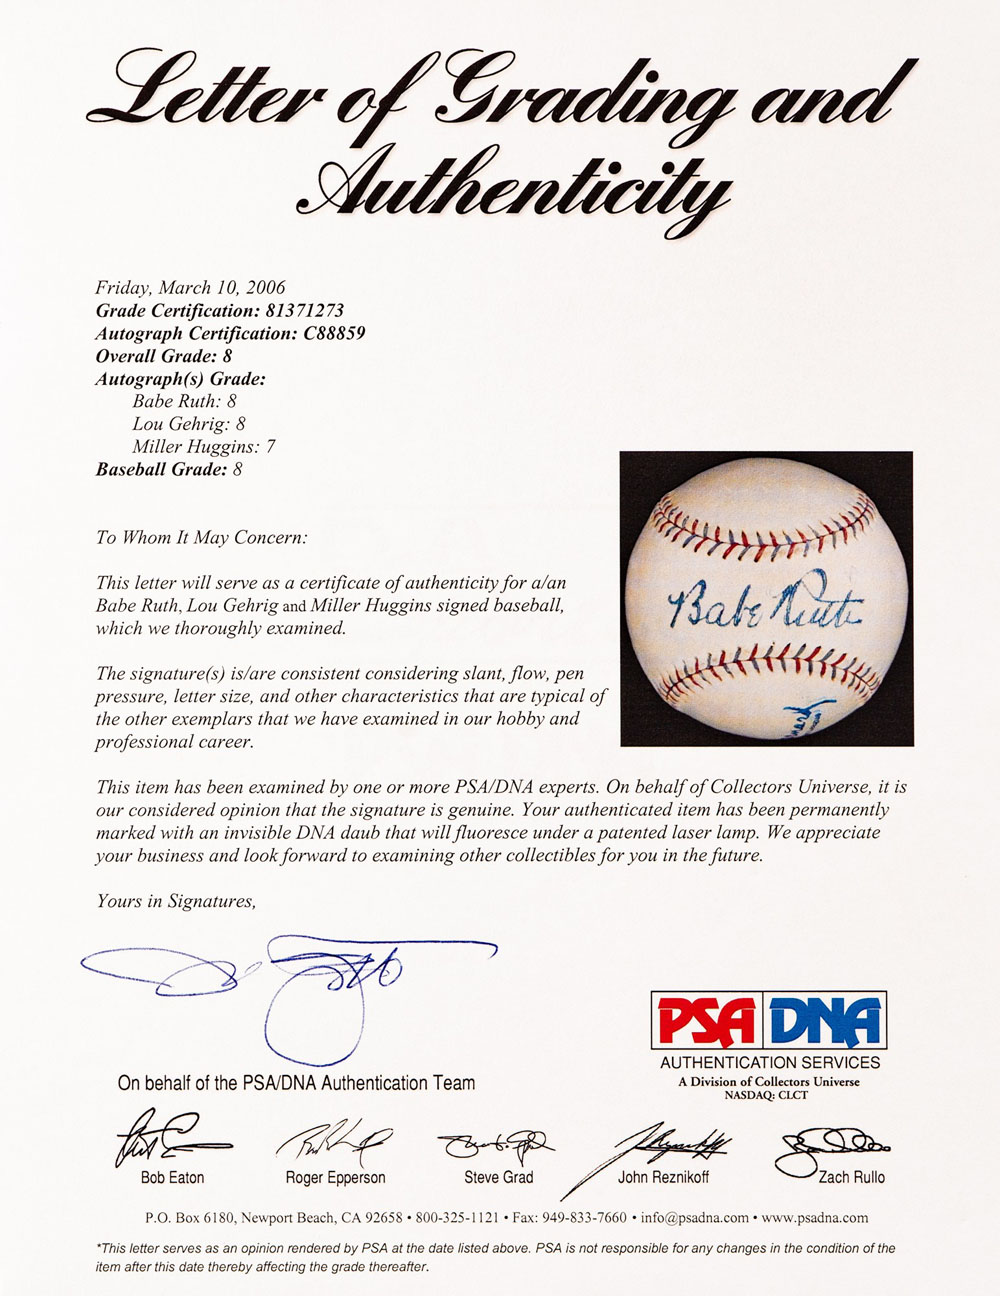 Who Needs A 401K If You Own A Baseball Signed By Babe Ruth?